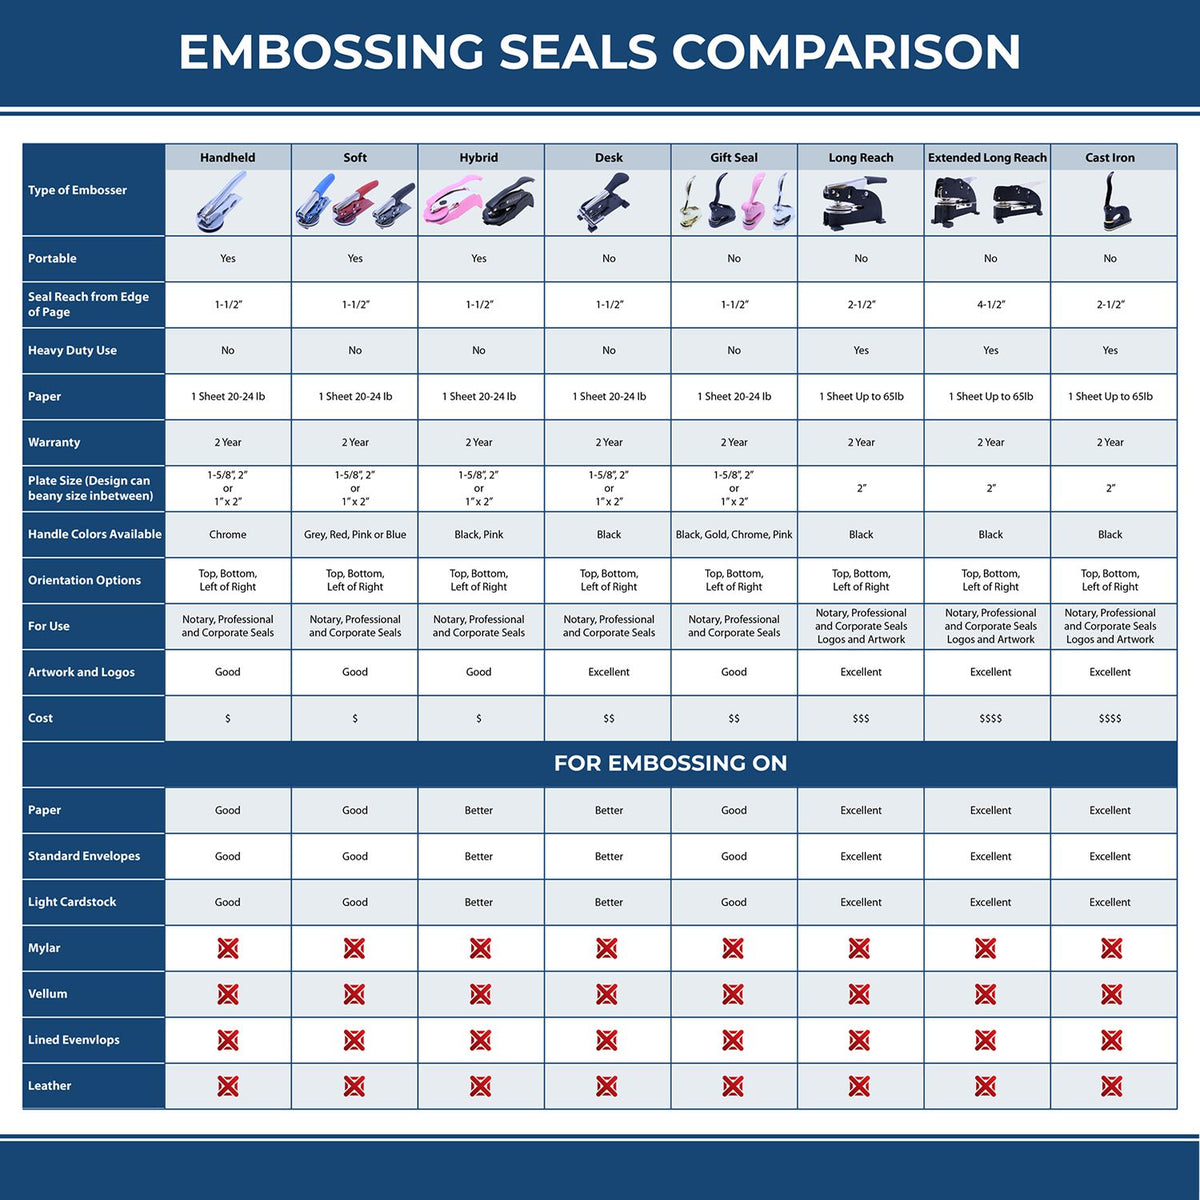 A comparison chart for the different types of mount models available for the Soft Montana Professional Engineer Seal.